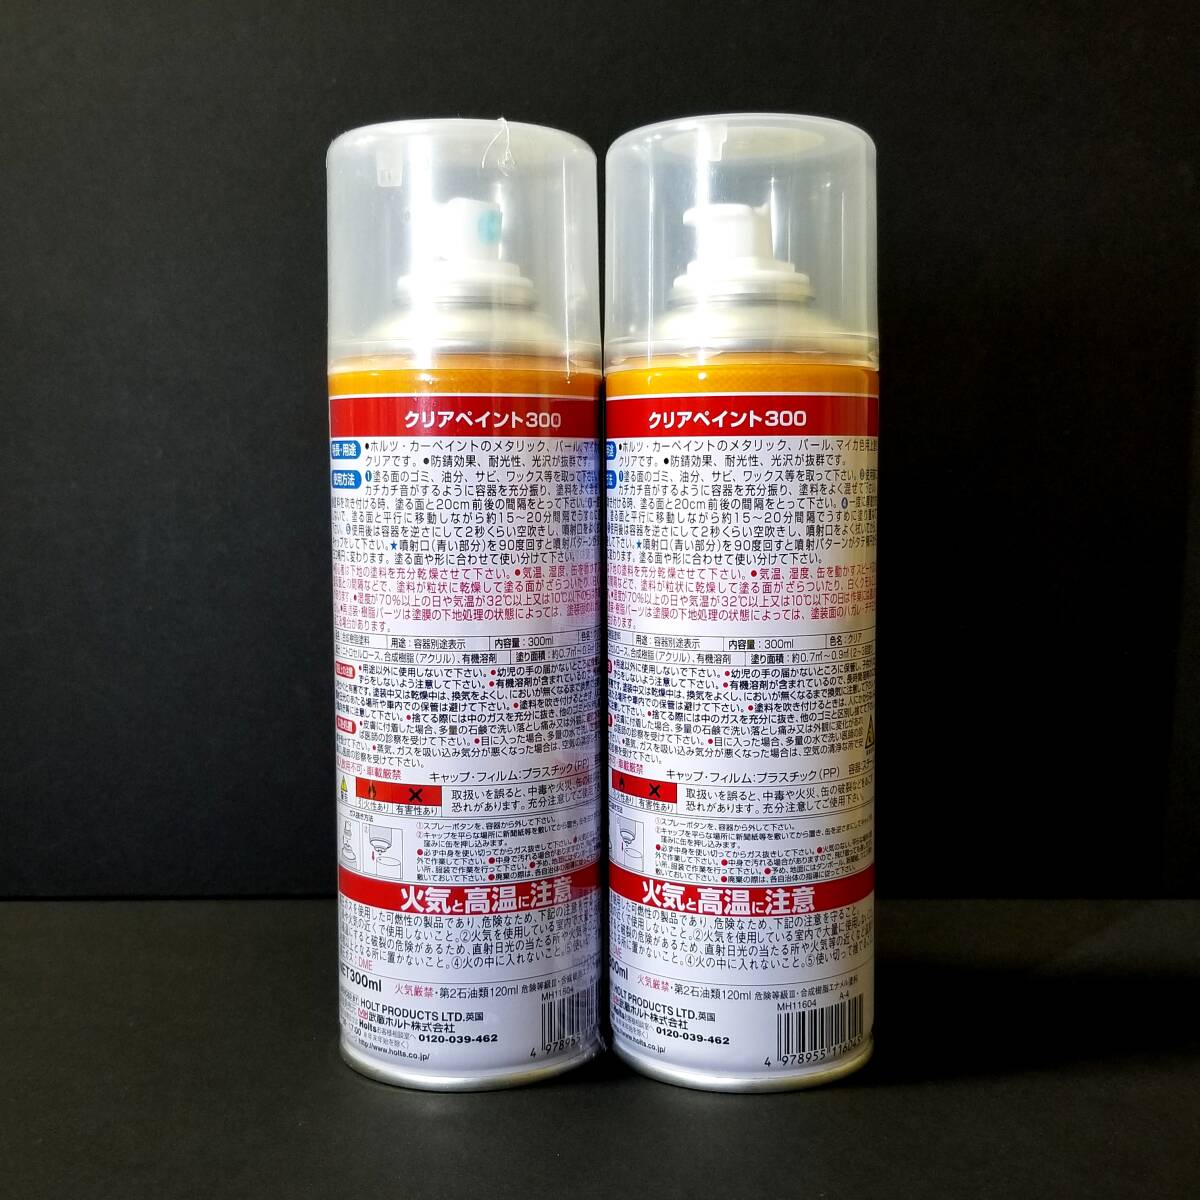 Holts ho rutsu for automobile spray paint MH11604 A-4 clear 300ml on coating freebie attaching 